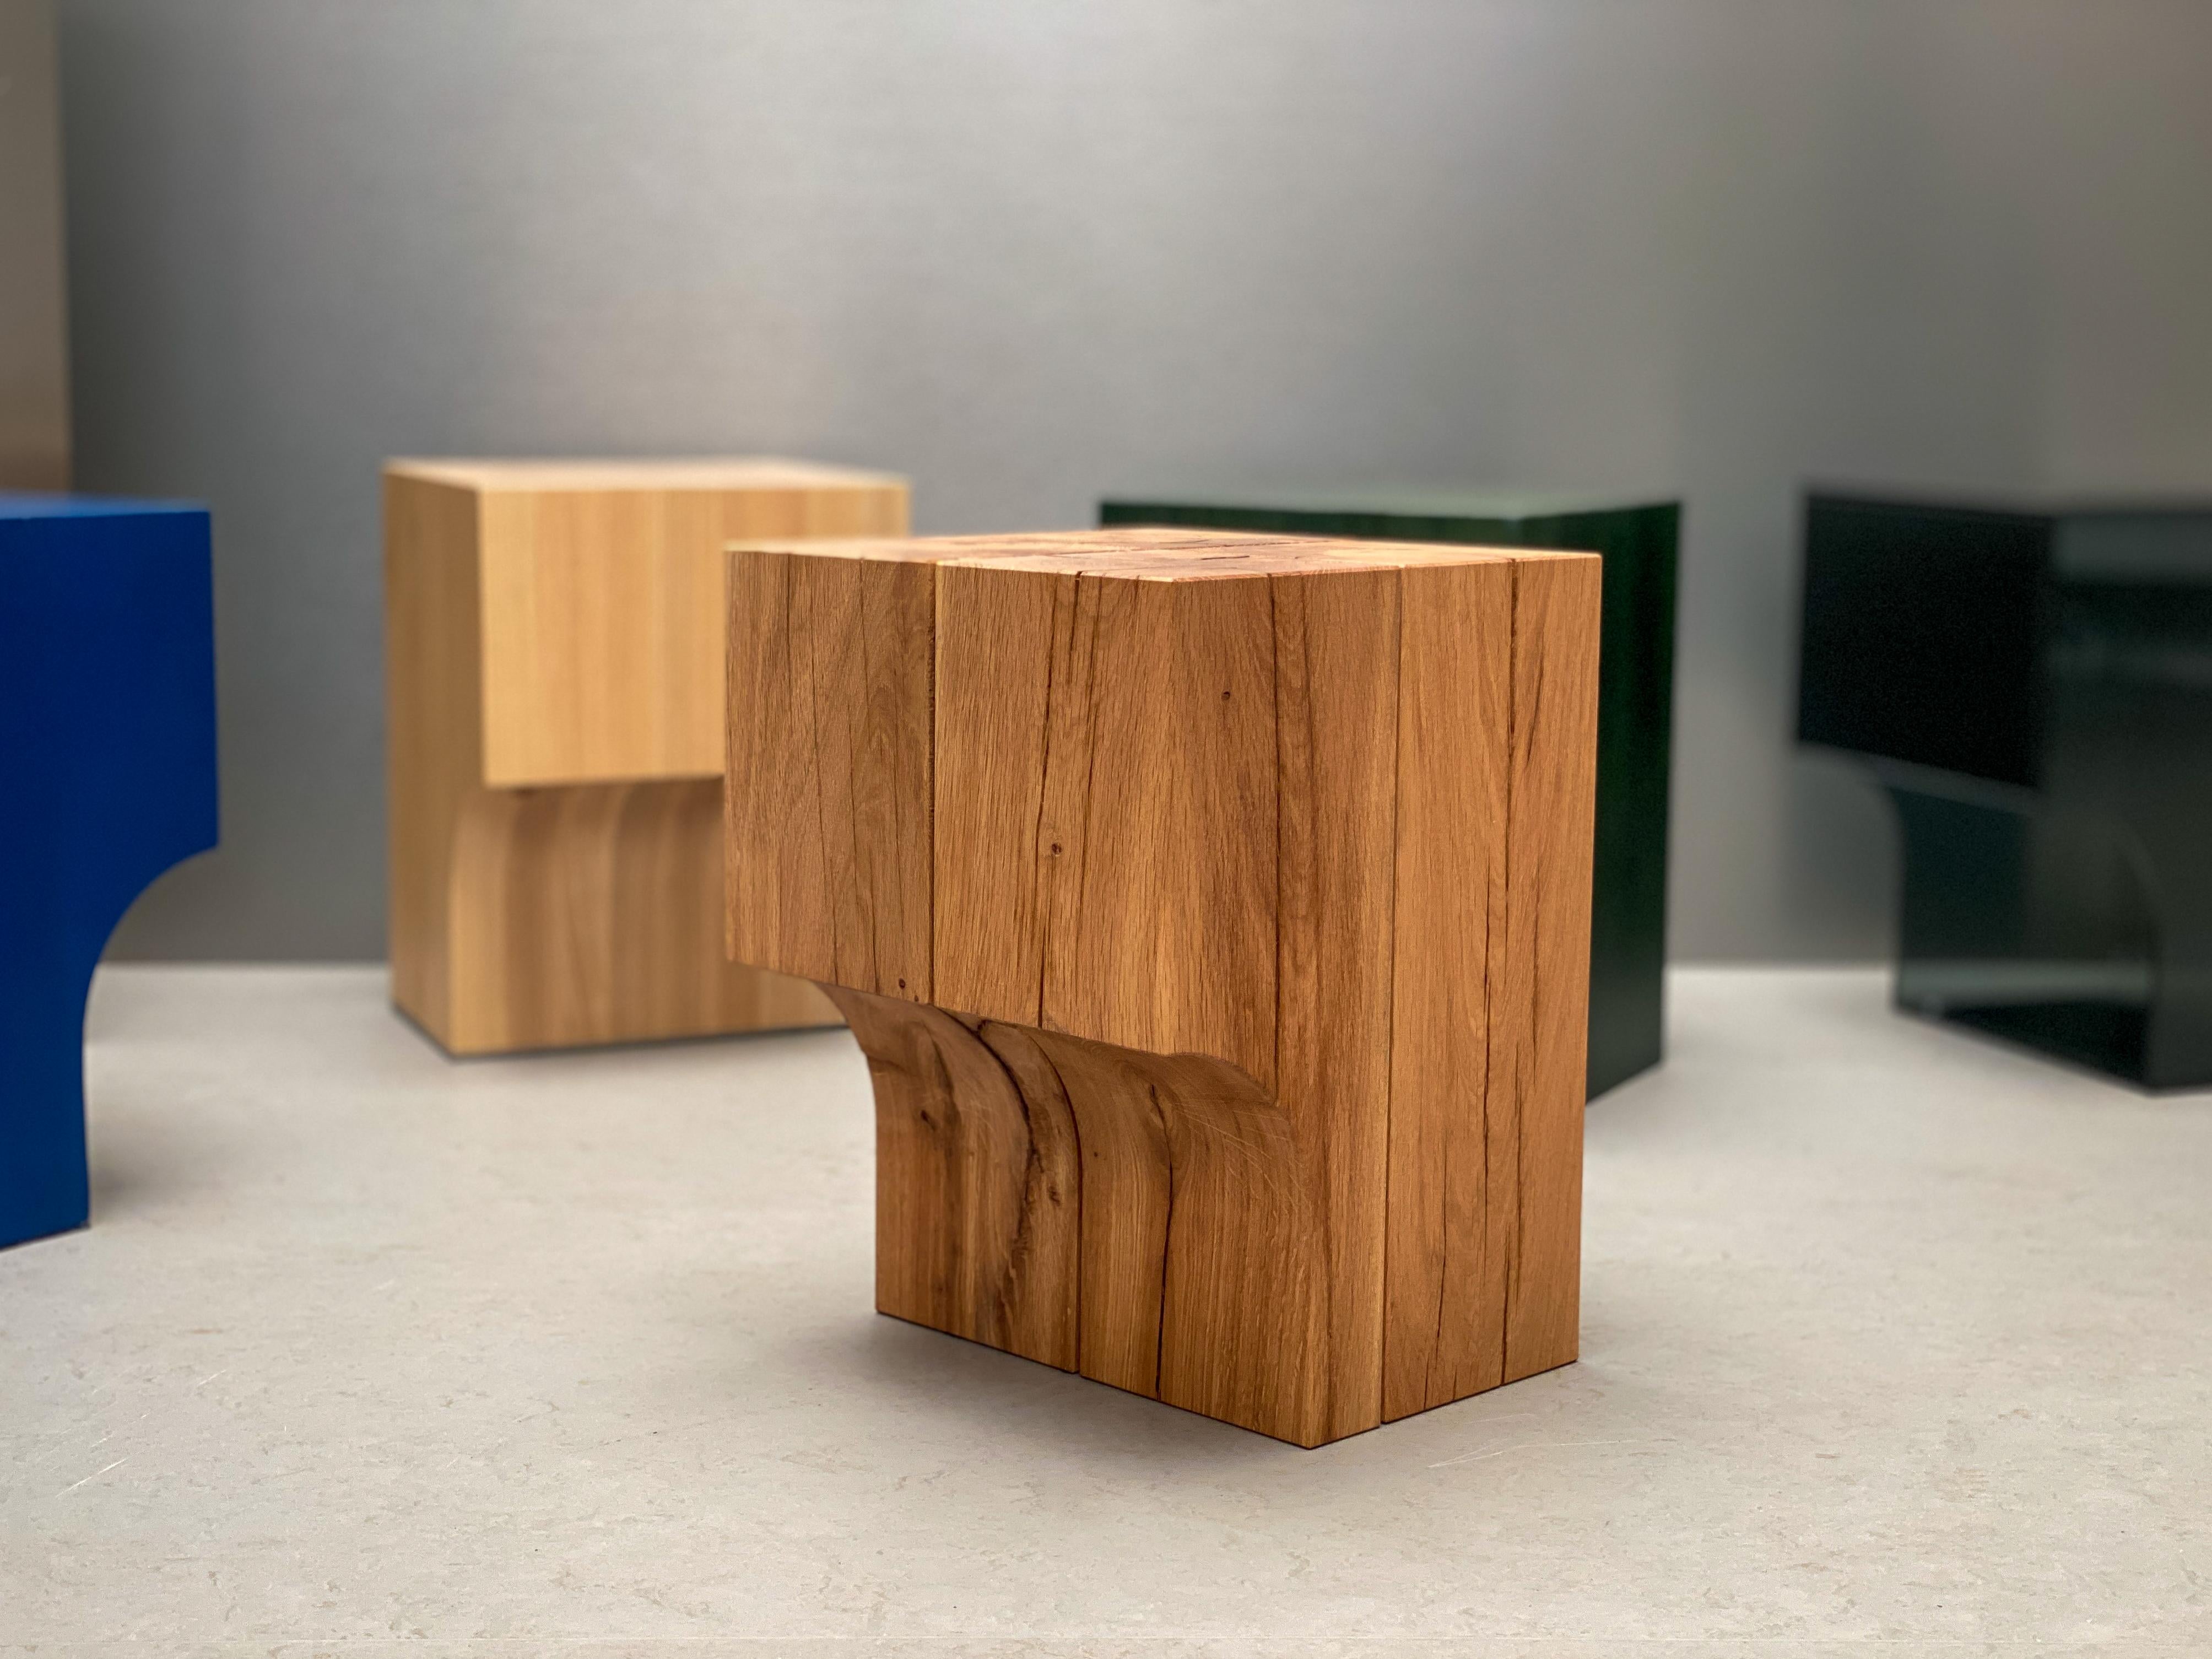 Arch 01.1 is a stool or a side table with a clear design language. What looks like a static element quickly becomes much more dynamic when in use by someone sitting on it. The curve that slims down the seating object, creates a difference in mass,